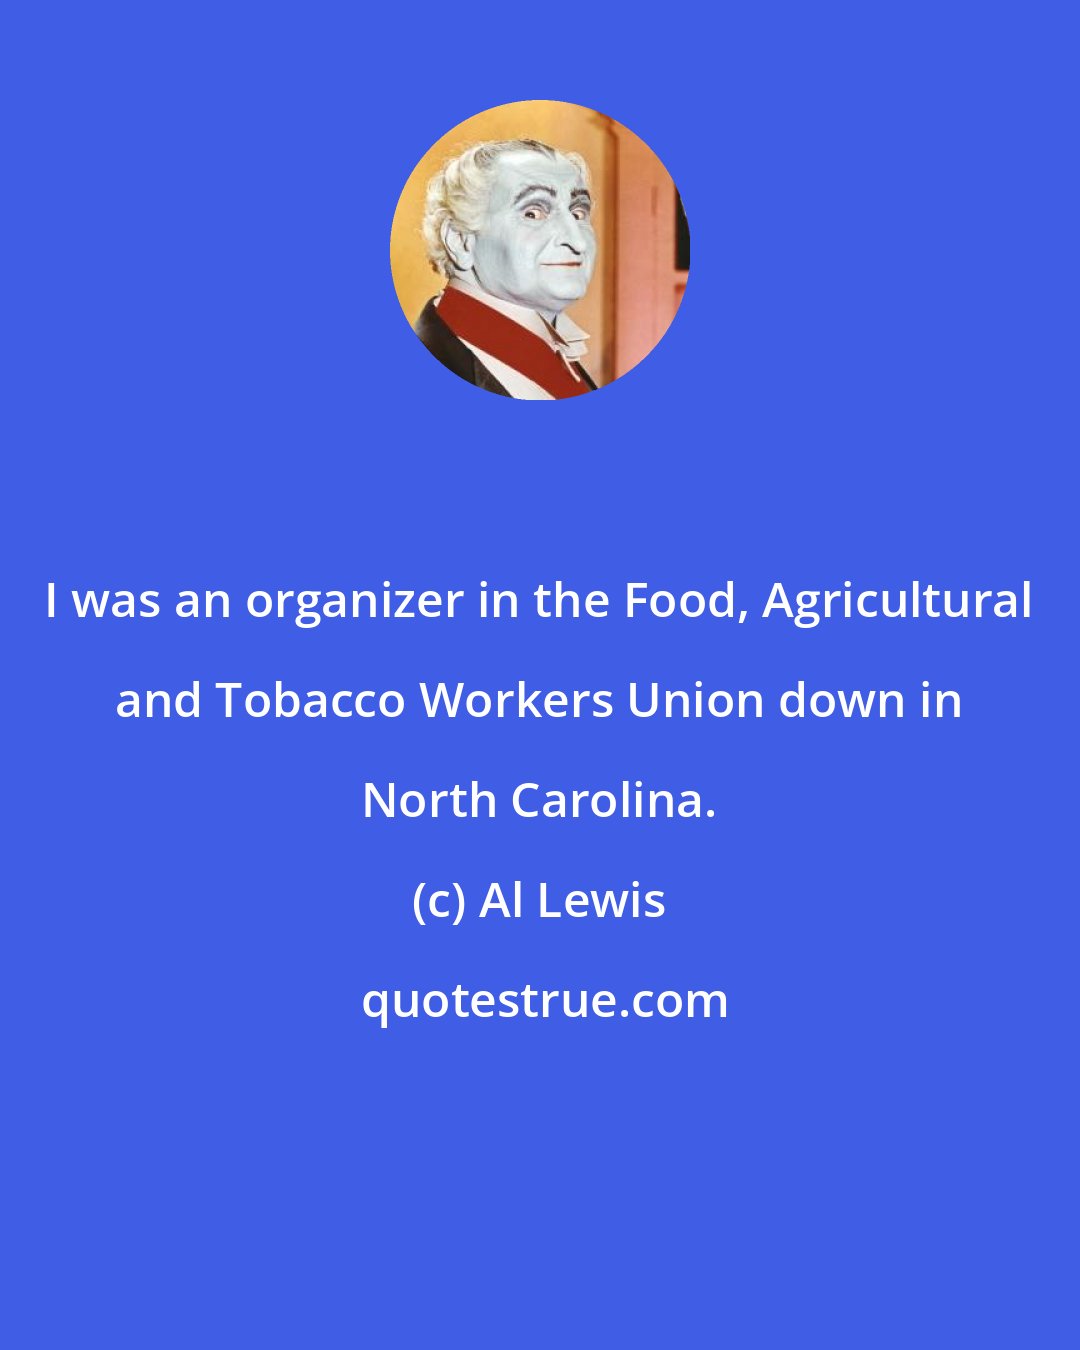 Al Lewis: I was an organizer in the Food, Agricultural and Tobacco Workers Union down in North Carolina.